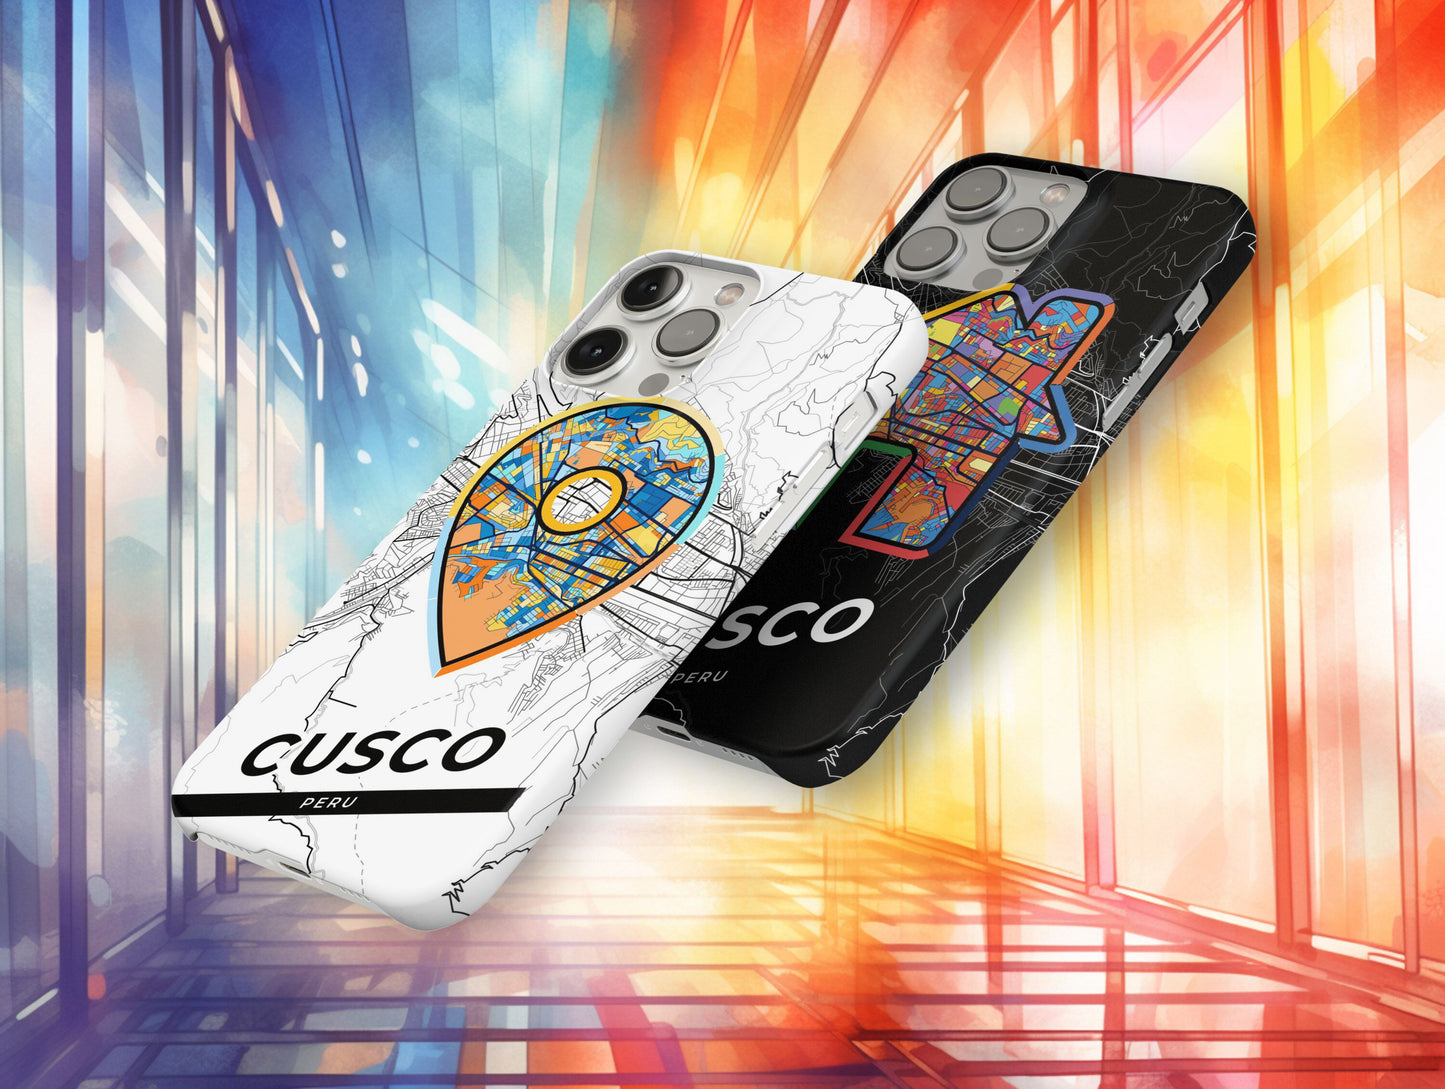 Cusco Peru slim phone case with colorful icon. Birthday, wedding or housewarming gift. Couple match cases.